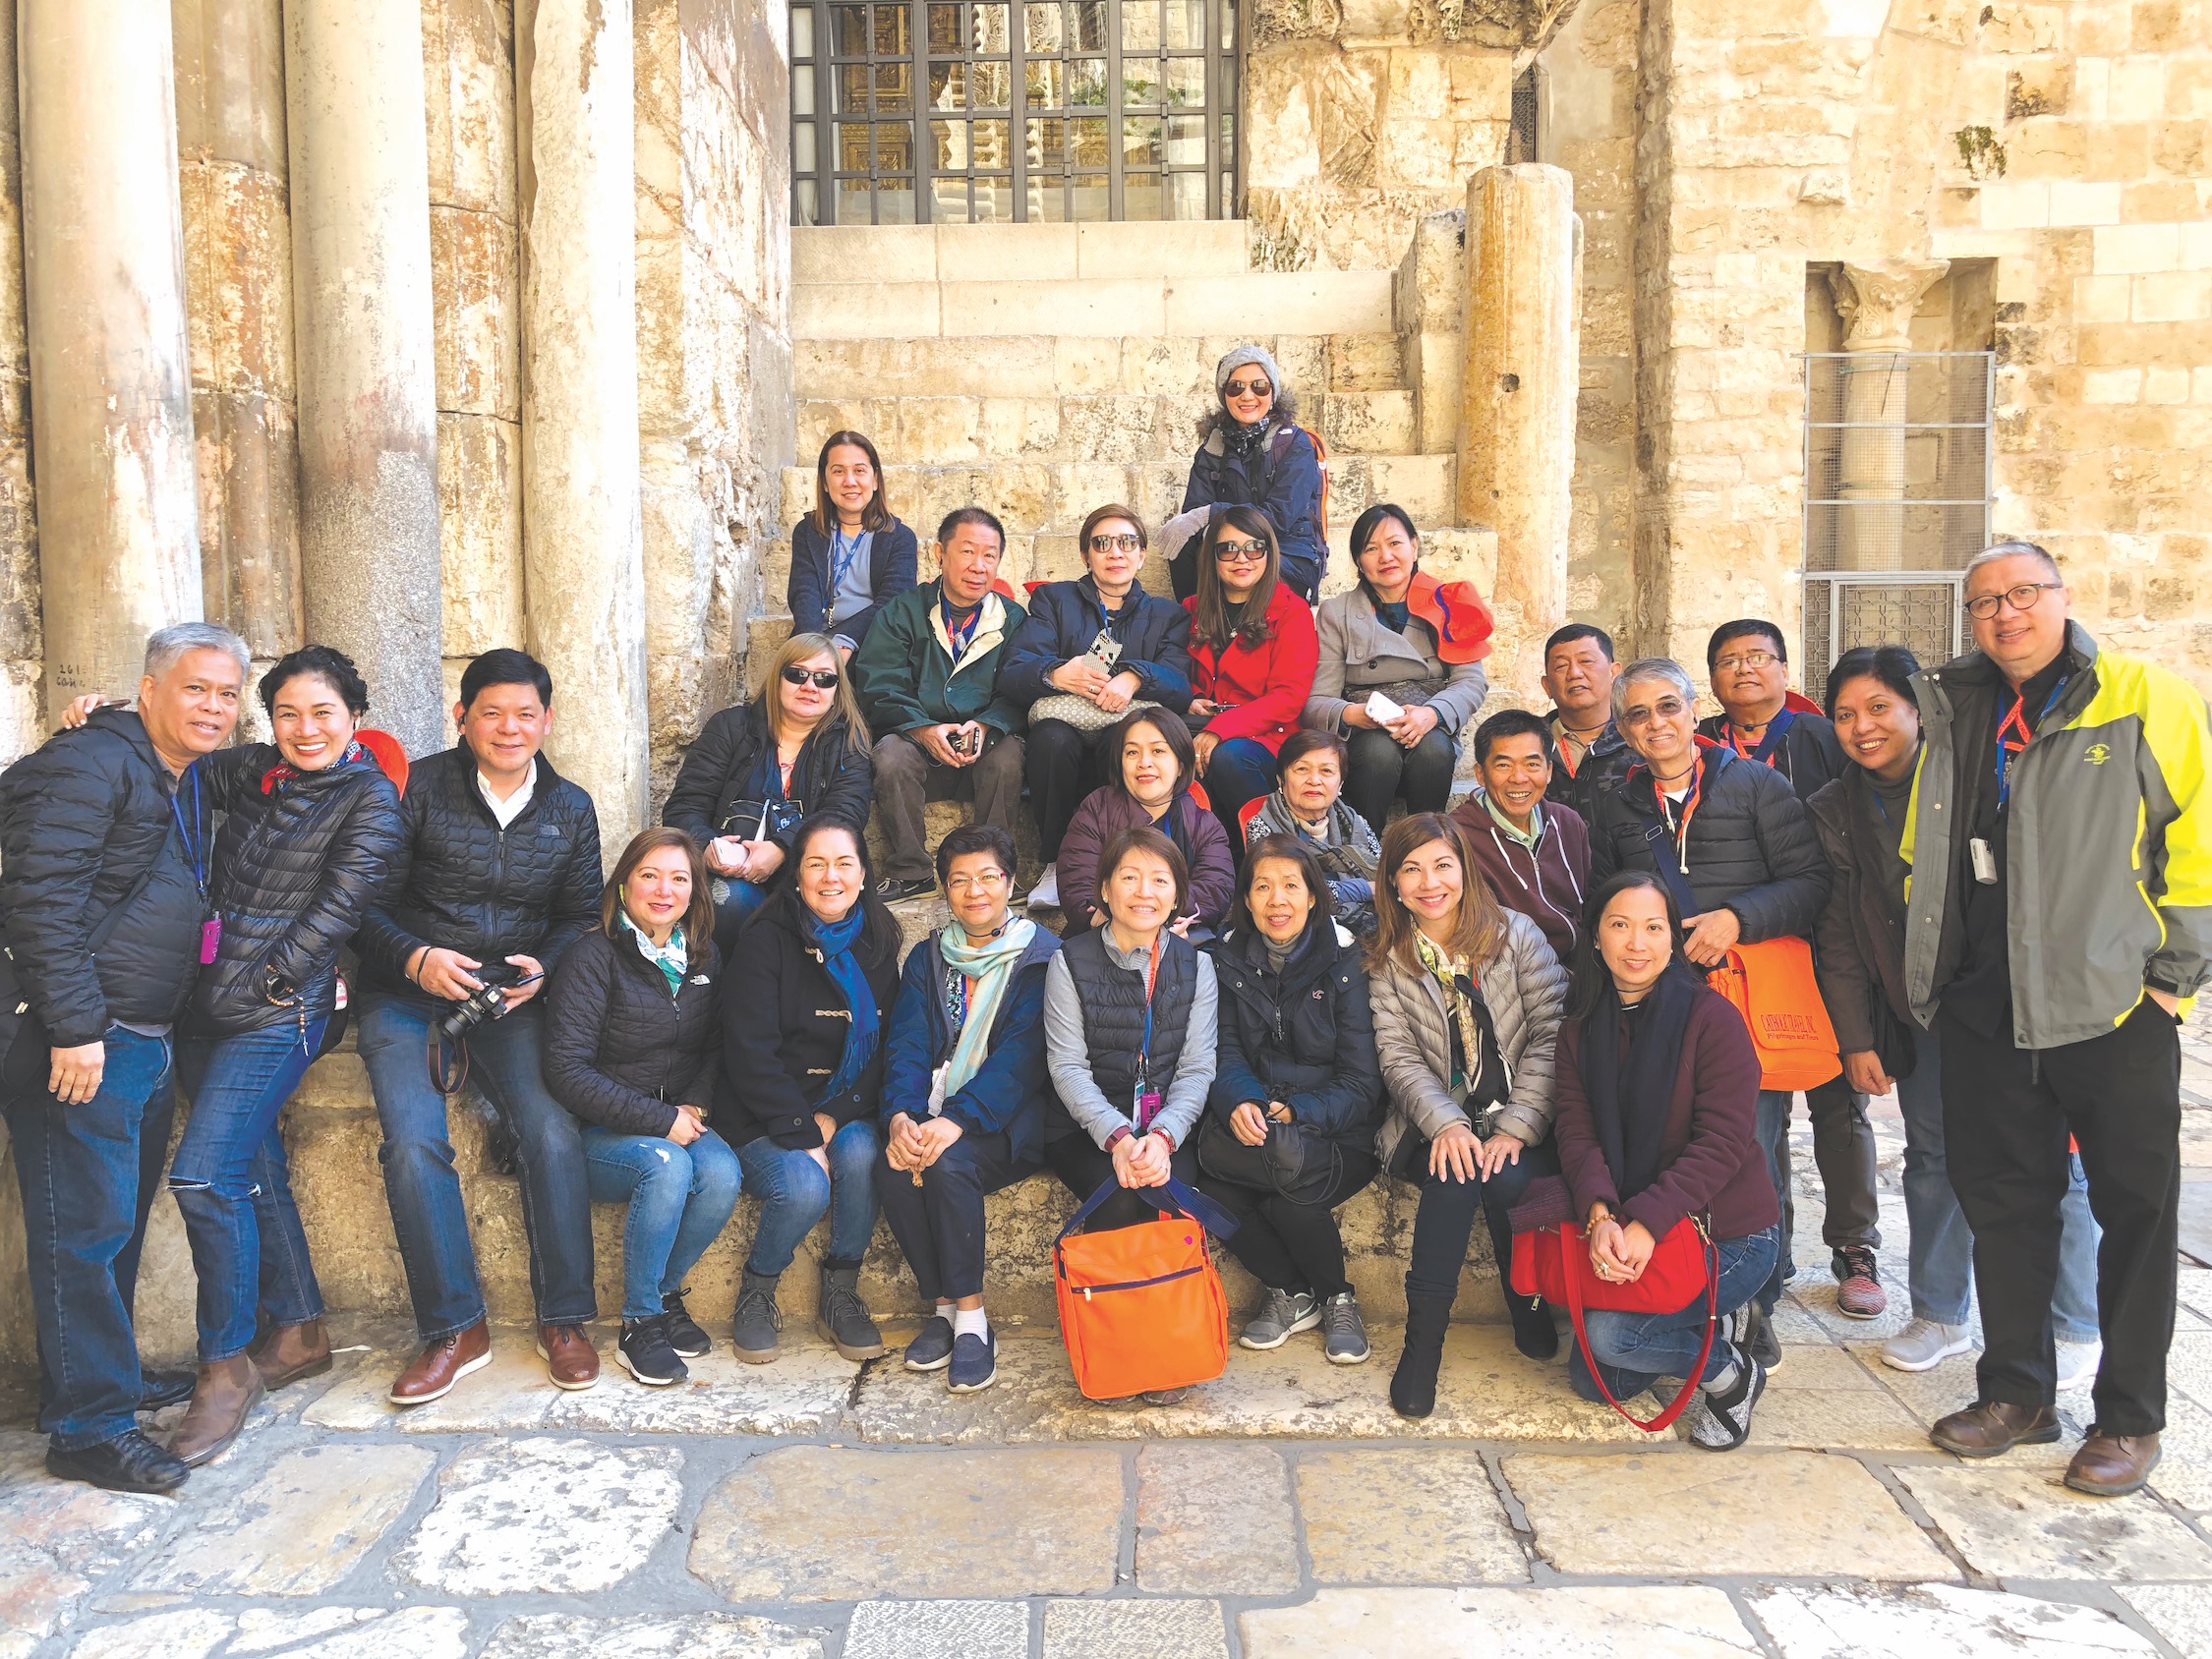 With Fr. Dave Concepcion (EXTREME RIGHT) in Jerusalem are (FRONT ROW, FROM LEFT) Benjie and Tata Uy, Ferdie and Tonette Castillo, Tina Maramba, Yoly Cheng, Andie Uy, Amy de Guzman, the author, Dr. Prescy Austero. (SECOND ROW) Dolly Perez, Gina Garcia, Leonor Uy, Ed Uy, Arnel Gonzales, Milo de Guzman, Fermin Santos, Adele Joaquin. (THIRD ROW) Norma Tinoco, Bebot Cheng, Mary Tan, Arlene Santamaria, Minda Gonzales and (TOP ROW) Carie Villena